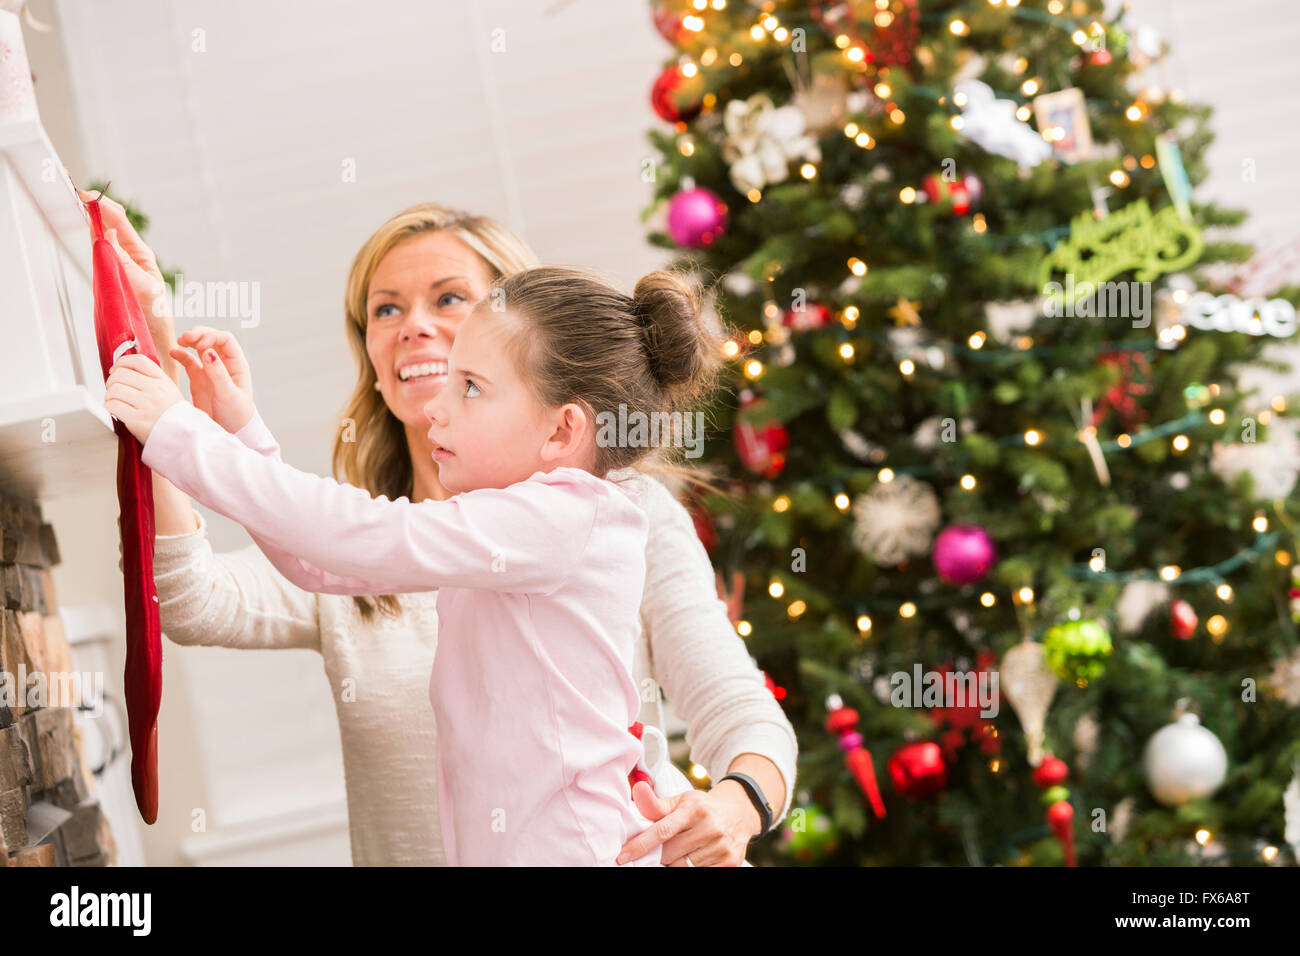 Caucasian mother and daughter hanging Christmas stockings Stock Photo